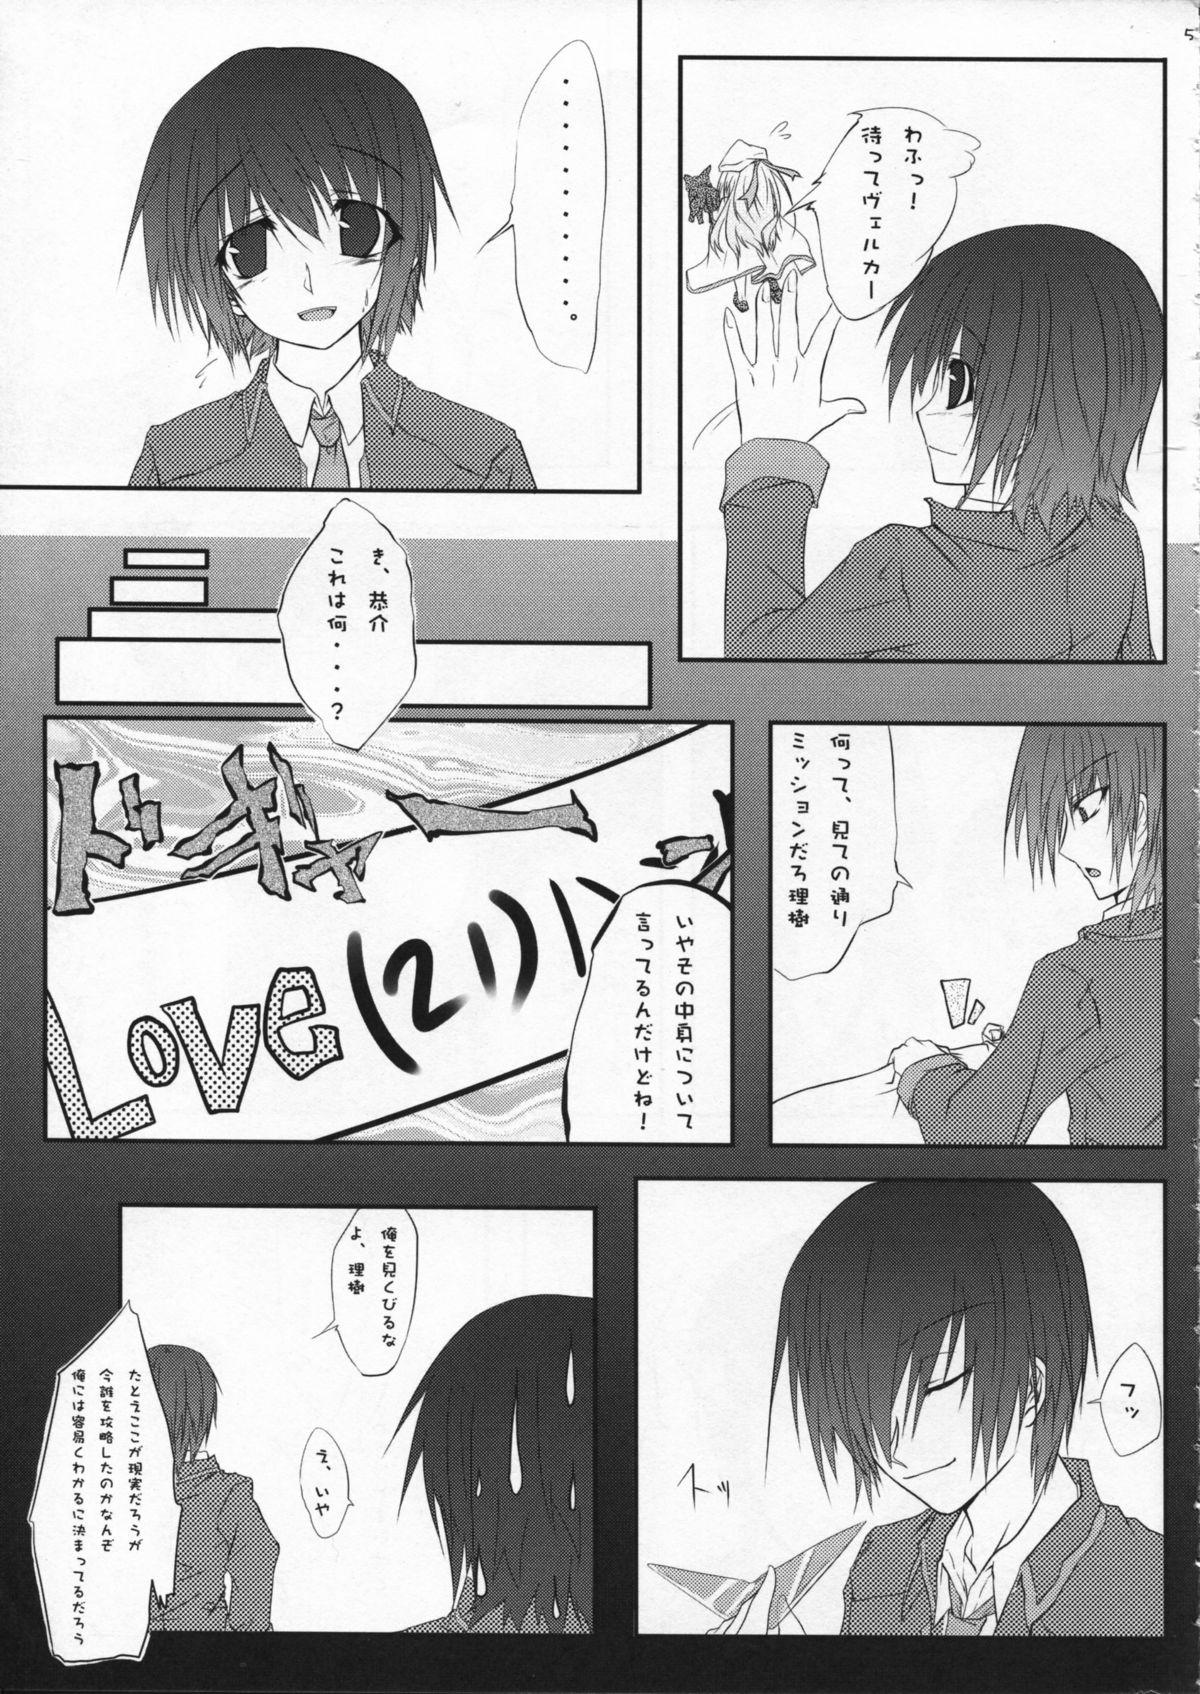 Fishnets Wanko no Jikan - Little busters Gay Dudes - Page 5